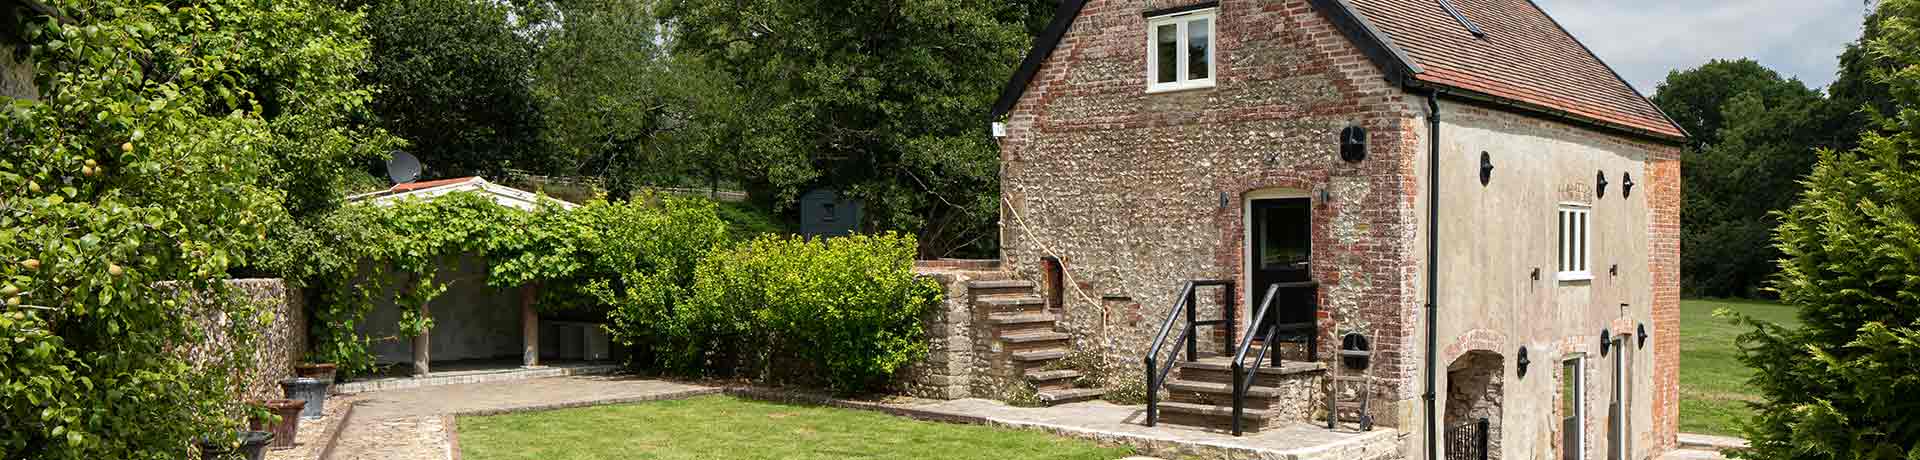 Cottages for 4 people in Essex